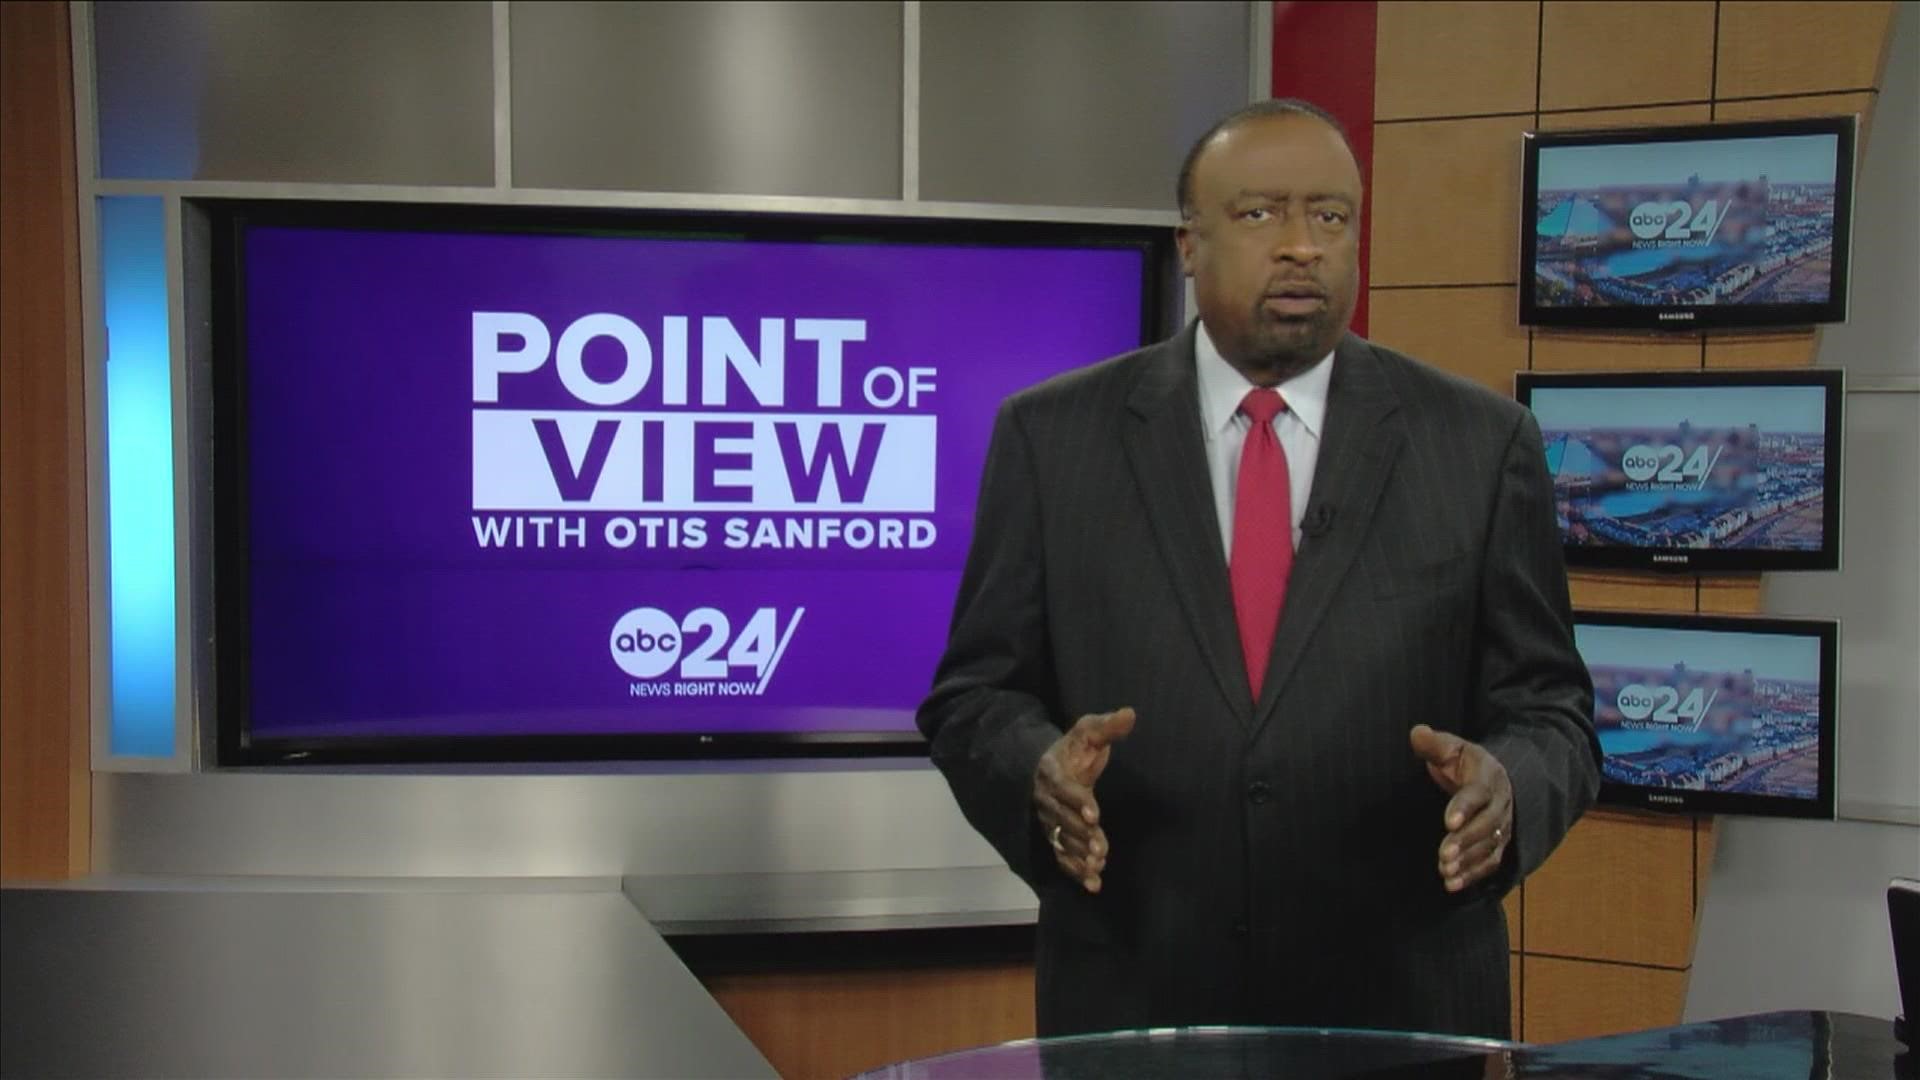 ABC24 political analyst and commentator Otis Sanford shared his point of view on partisan elections for the city of Memphis.